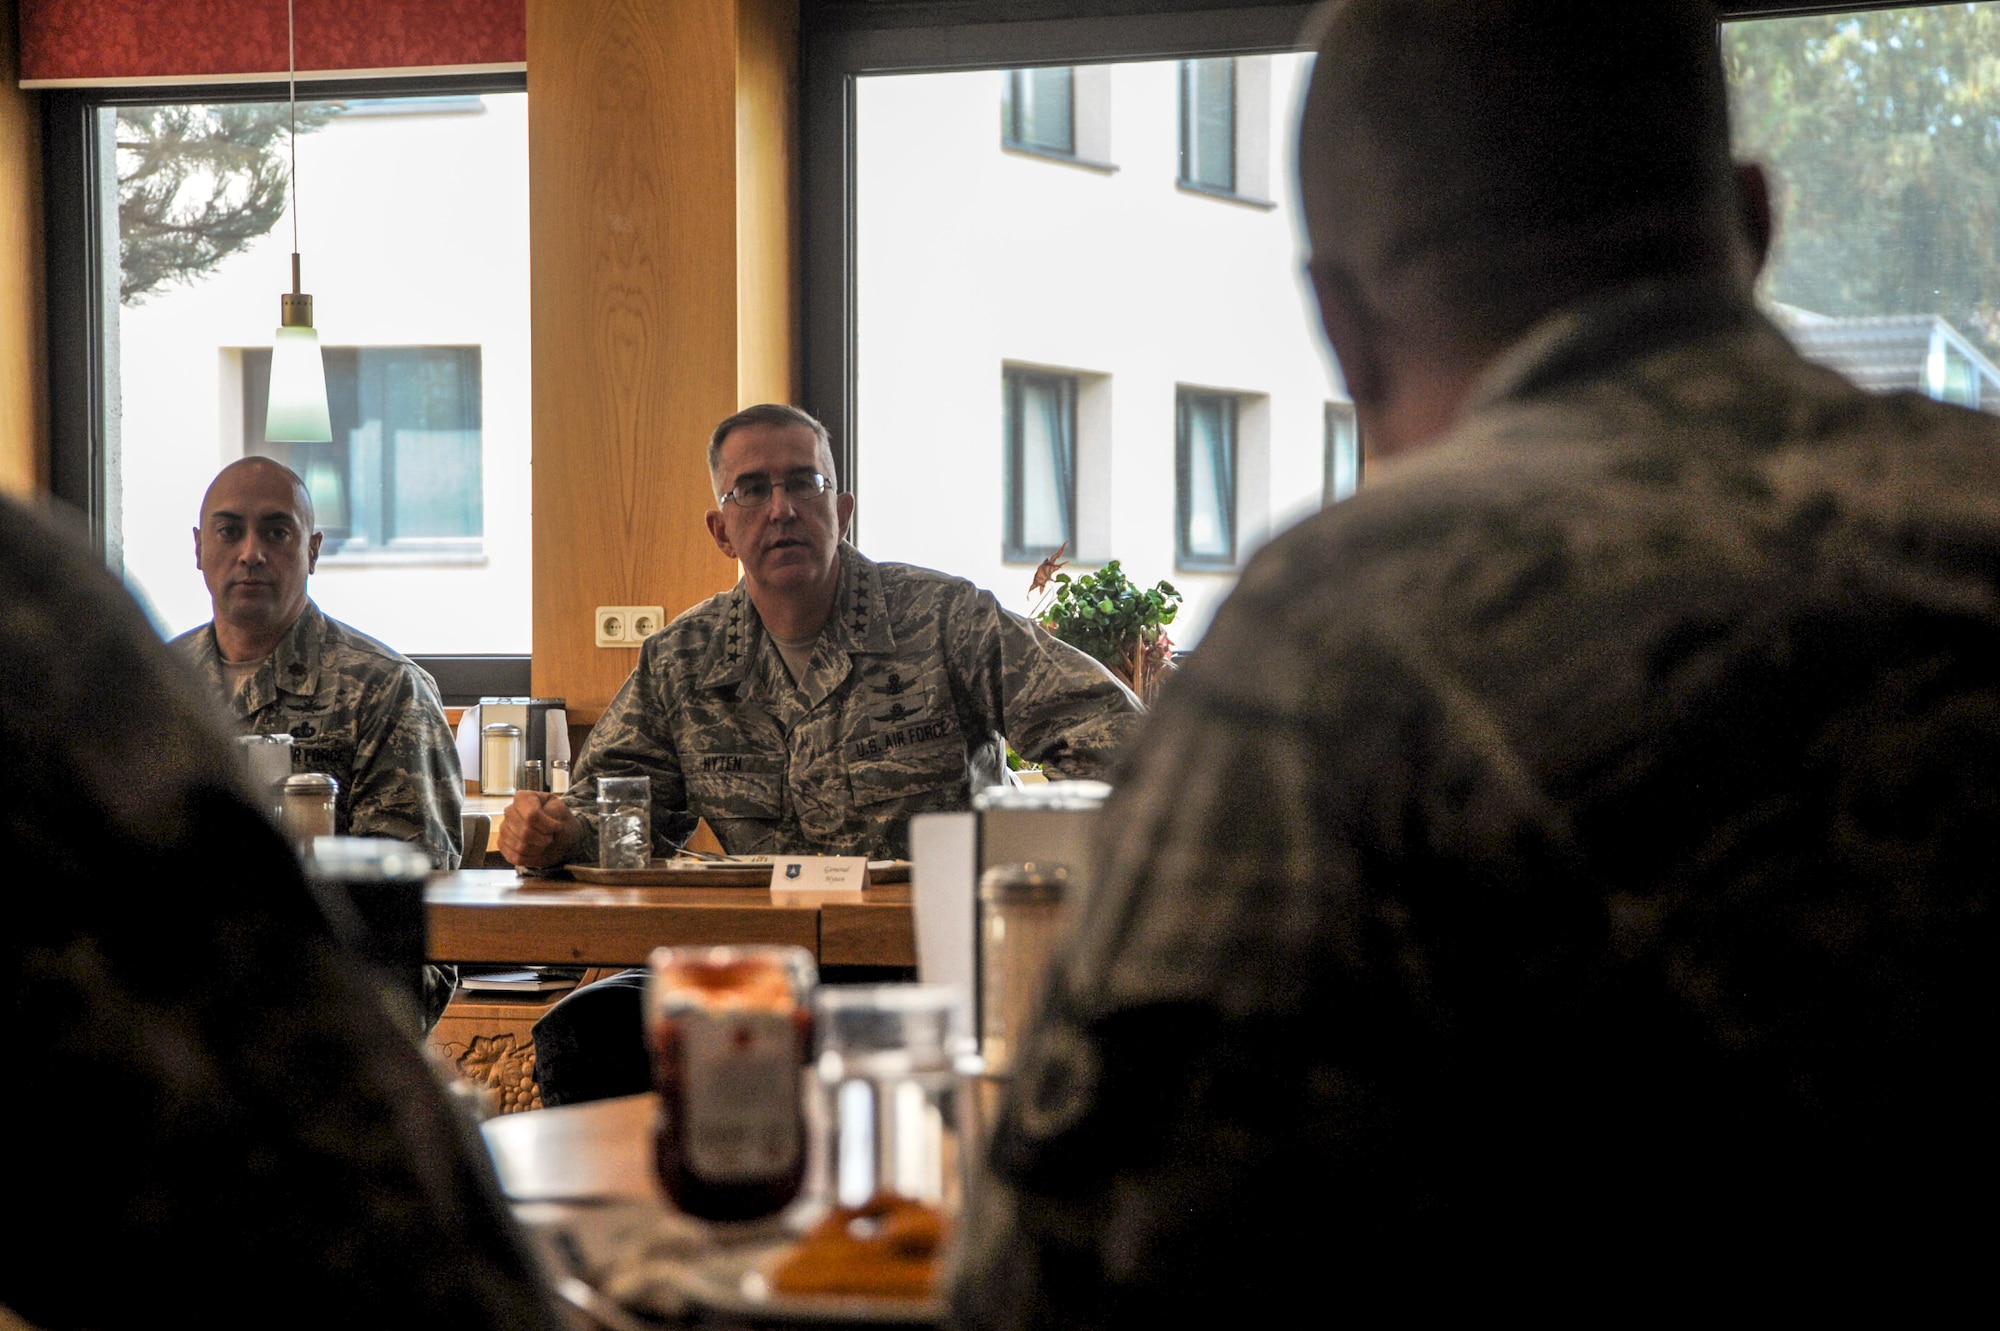 General John E. Hyten, Air Force Space Command commander, and Maj. Michael J. Hurley, 691st Cyberspace Operations Squadron commander, listen to a question posed by a 691st COS Airman at Ramstein Air Base, Germany, Oct. 4, 2016. Hyten visited the 691st COS, which was recently realigned under AFSPC. During his visit, Hyten had lunch with Airmen from the 691st COS, where they were able to ask him questions. (U.S. Air Force photo by Staff Sgt. Timothy Moore)